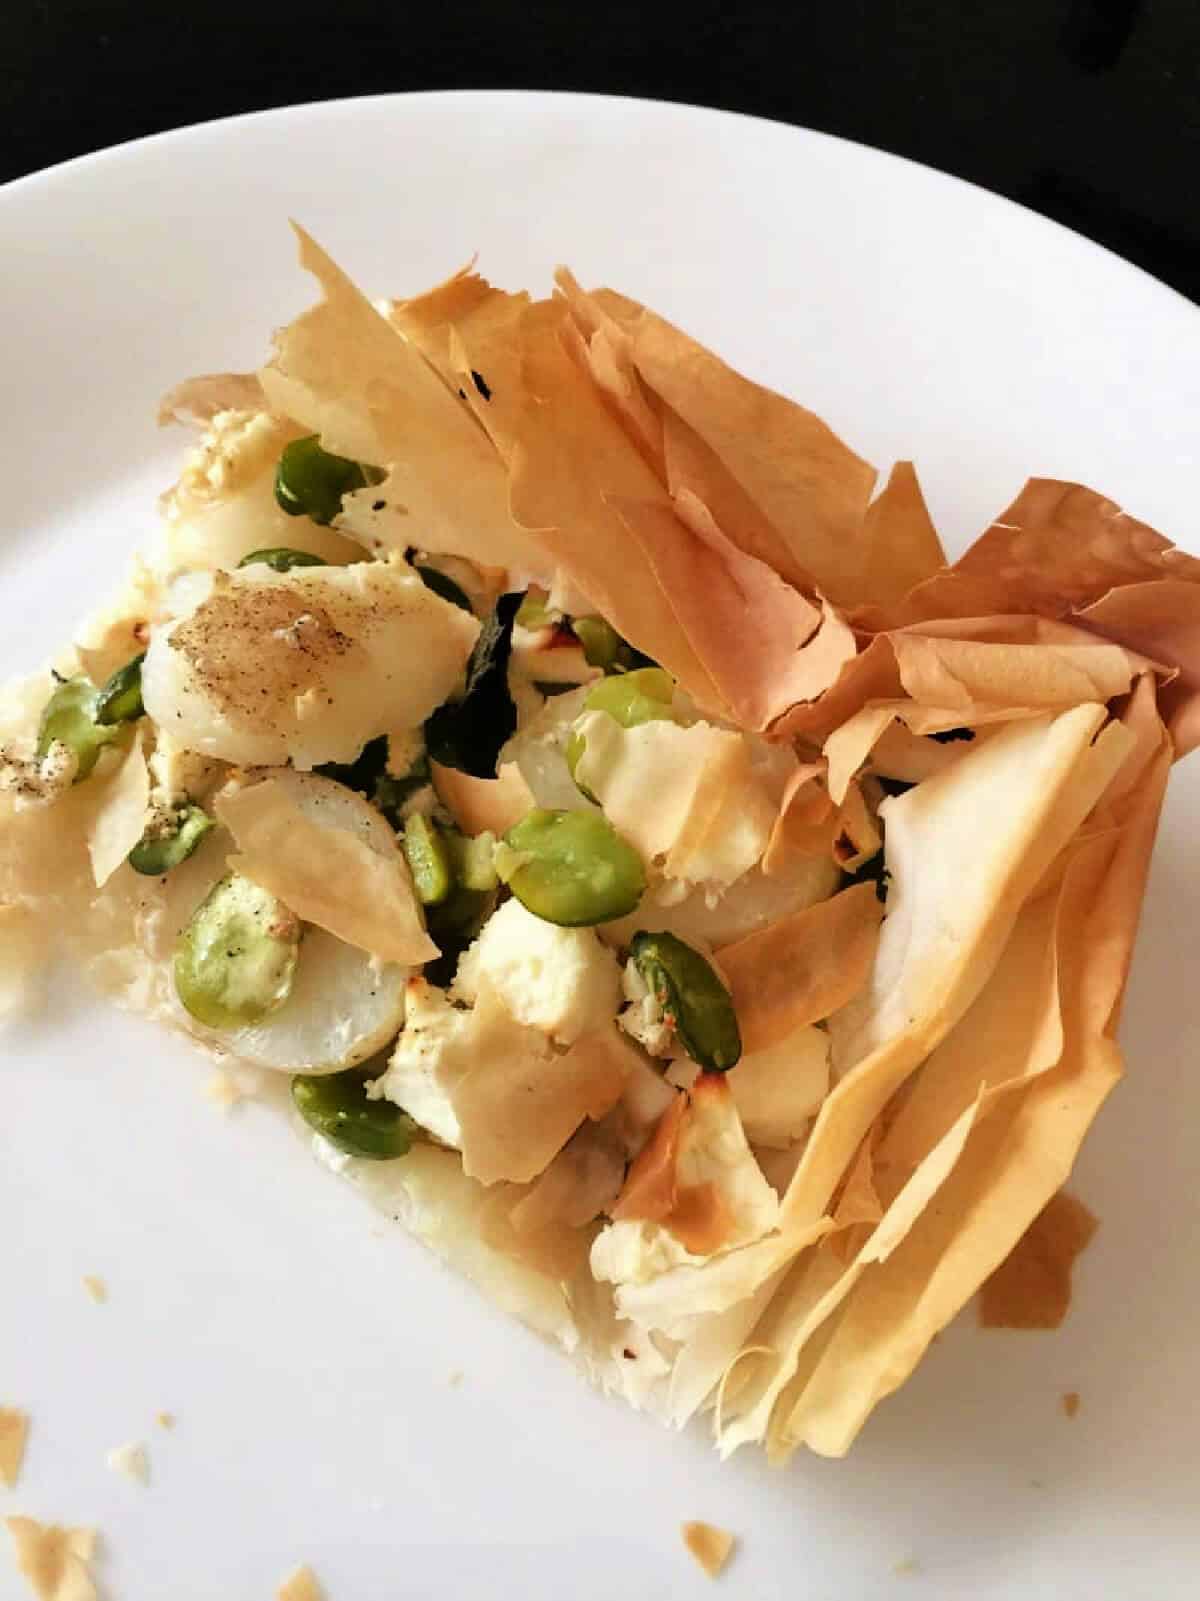 Portion of filo tart with feta and broad beans on white plate.